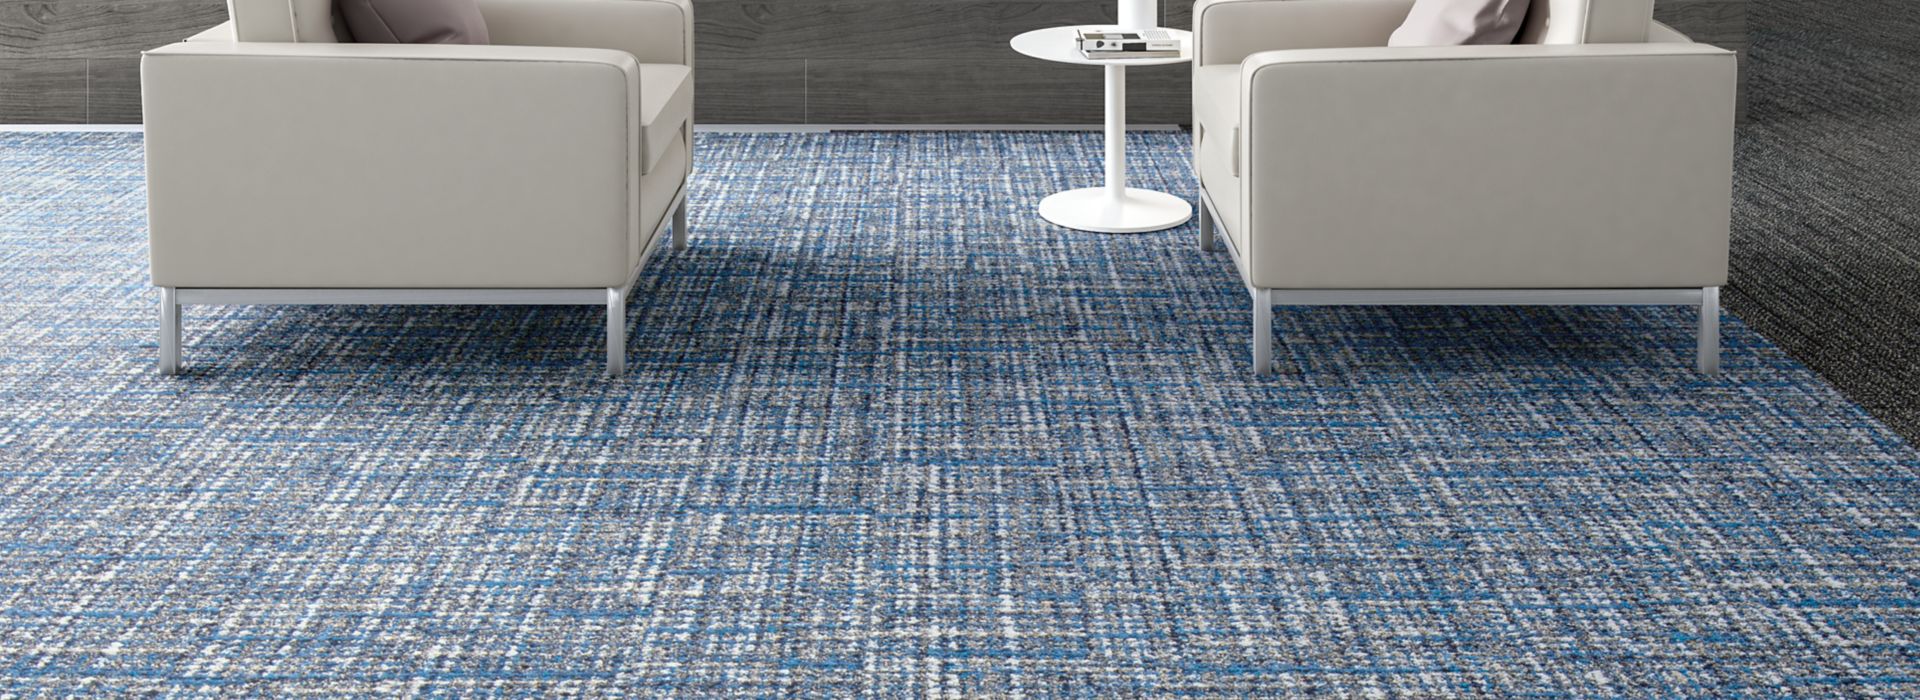 Interface WW895 plank carpet tile in lobby area with couches and side table  Bildnummer 1